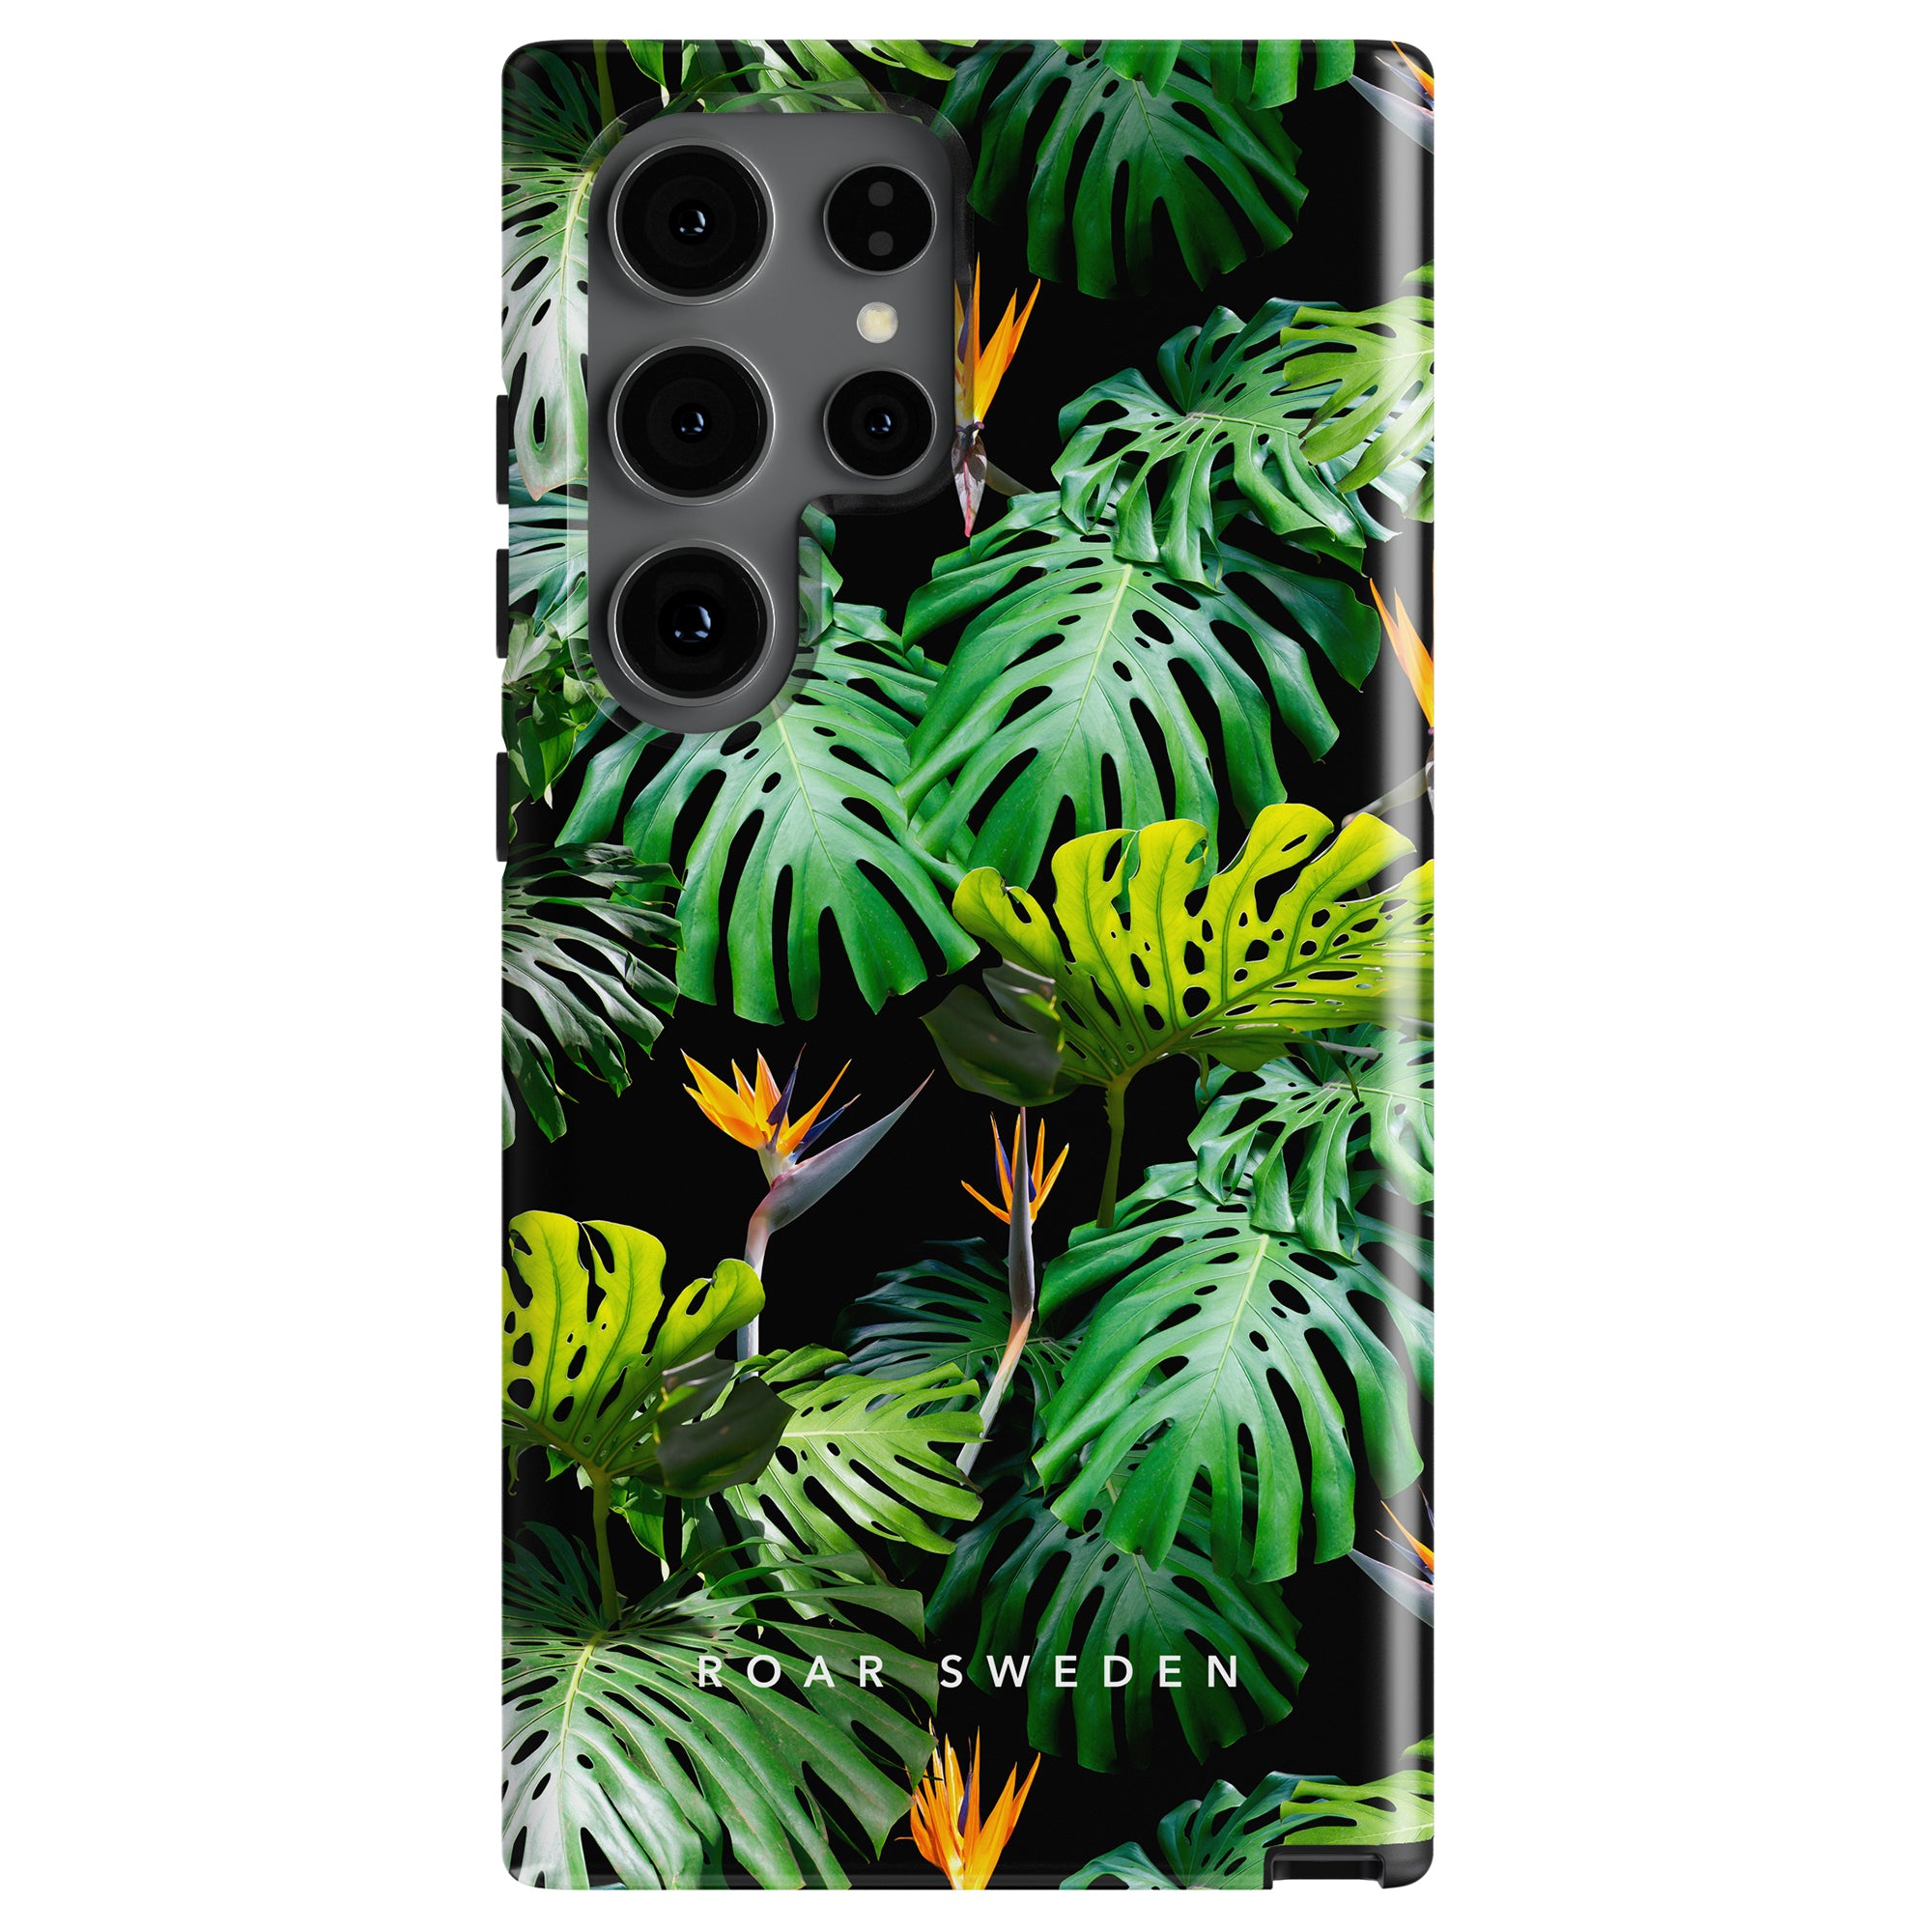 Hawaii - Tough case featuring palmbladsmönster and bird of paradise flowers, branded with "Roar Sweden," offering starkt skydd.